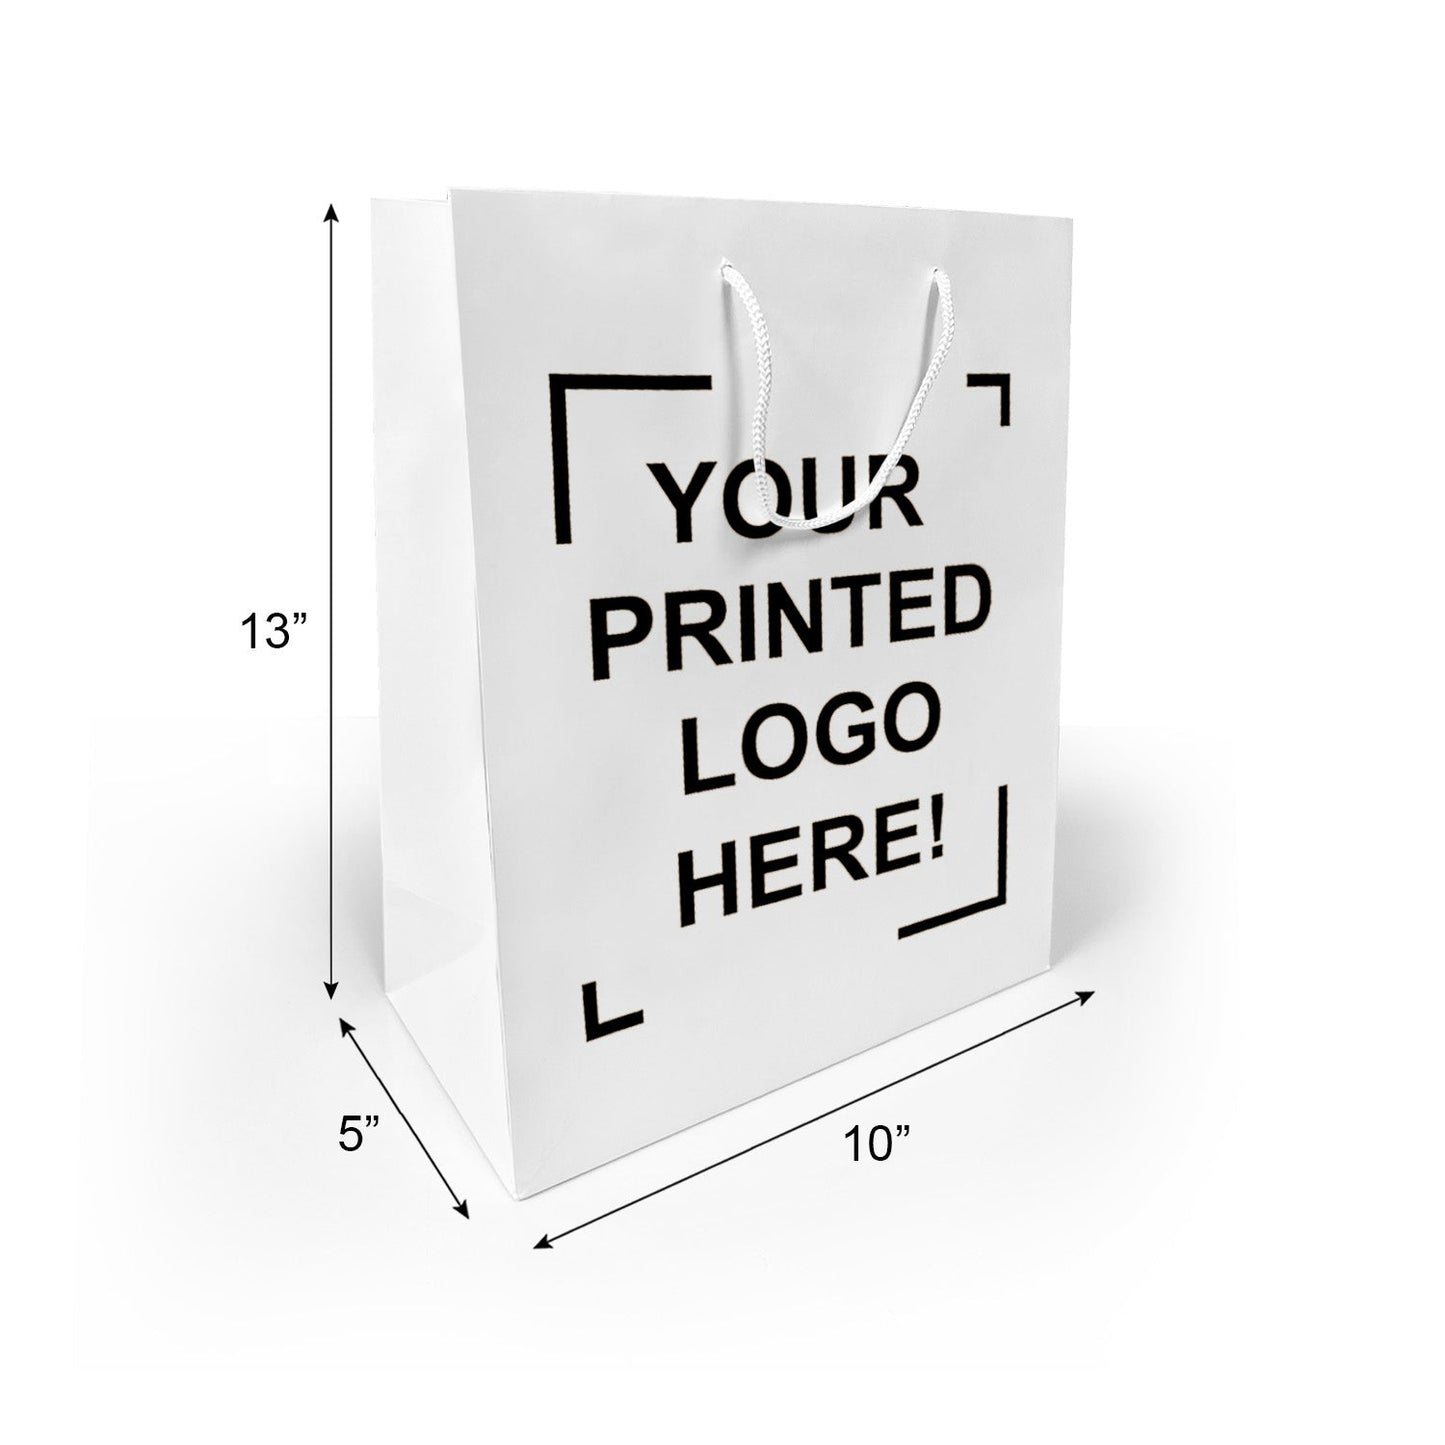 150 Pcs, Debbie, 10x5x13 inches, White Euro Tote Paper Bags, with Rope Handle, Full Color Custom Print